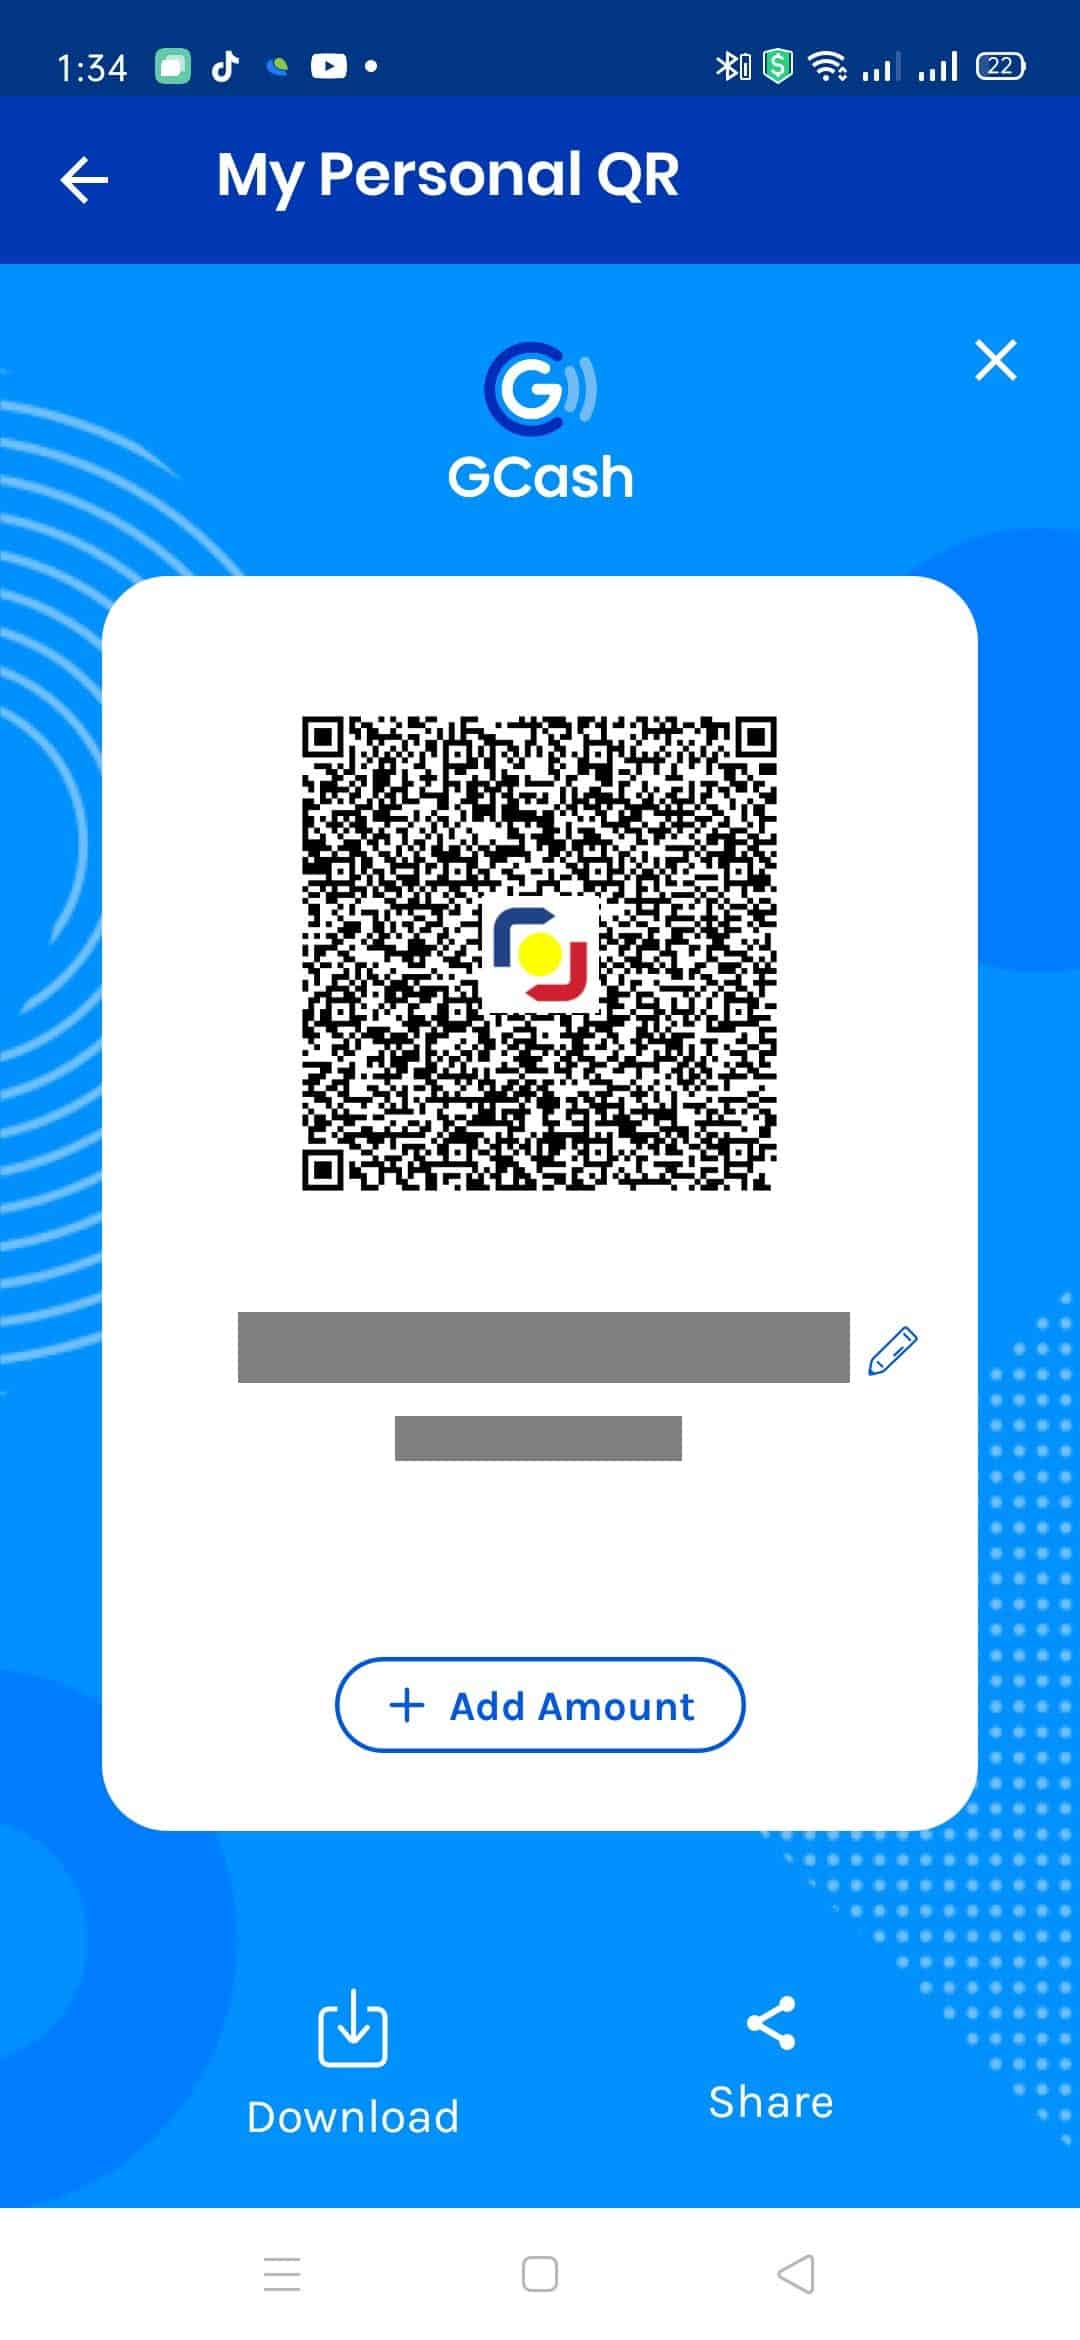 How to Quickly Setup your own QR Code for your Store (without